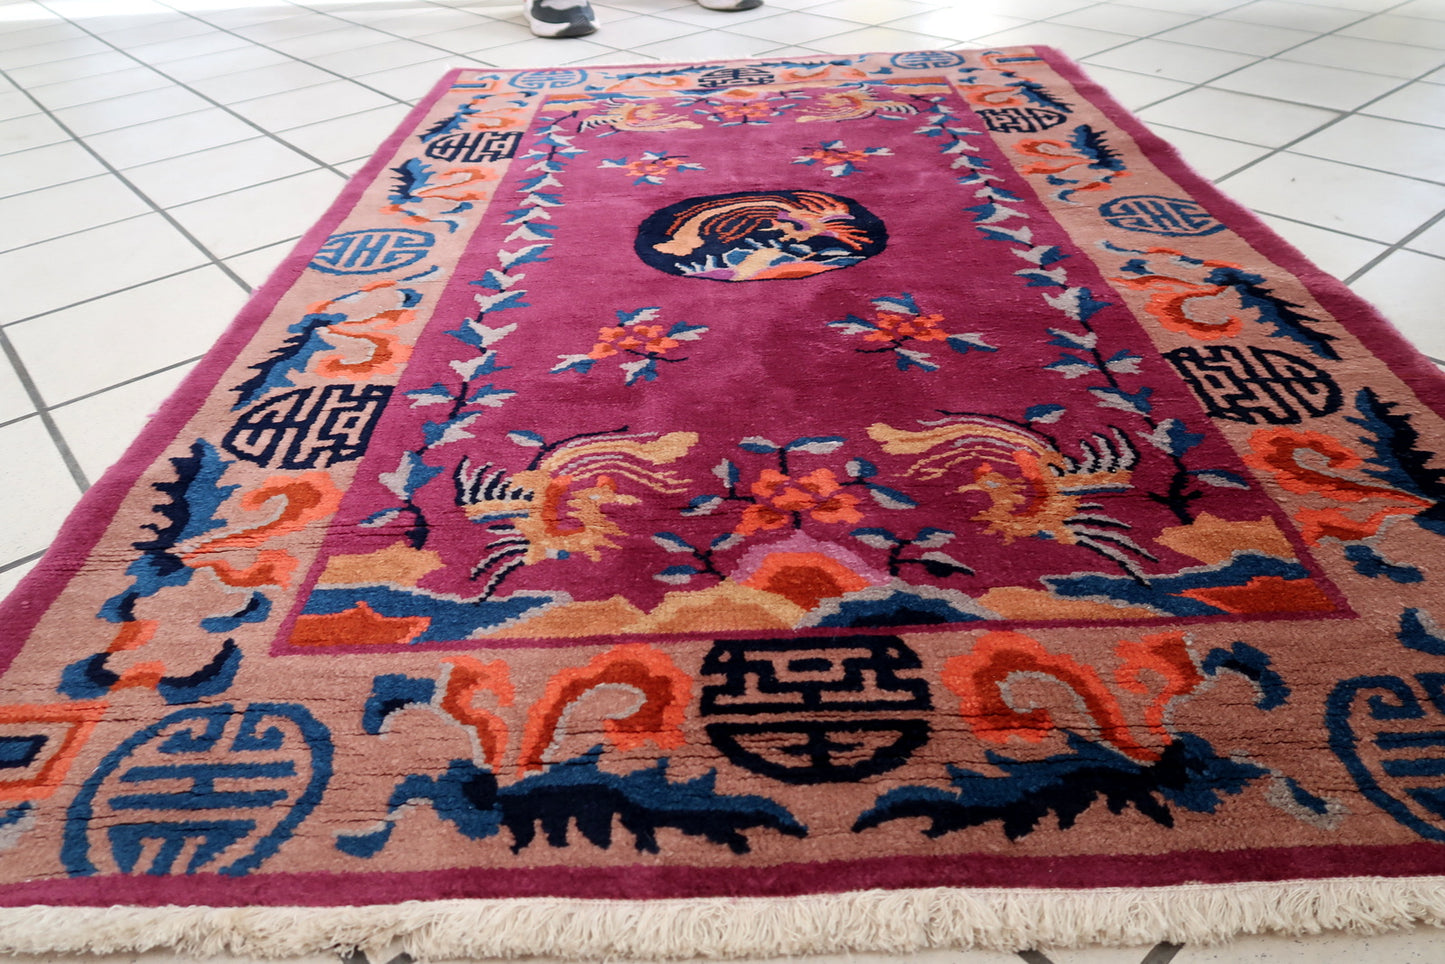 Fringe Detailing Adding Finishing Touch to Both Ends of Antique Art Deco Chinese Rug - 1920s